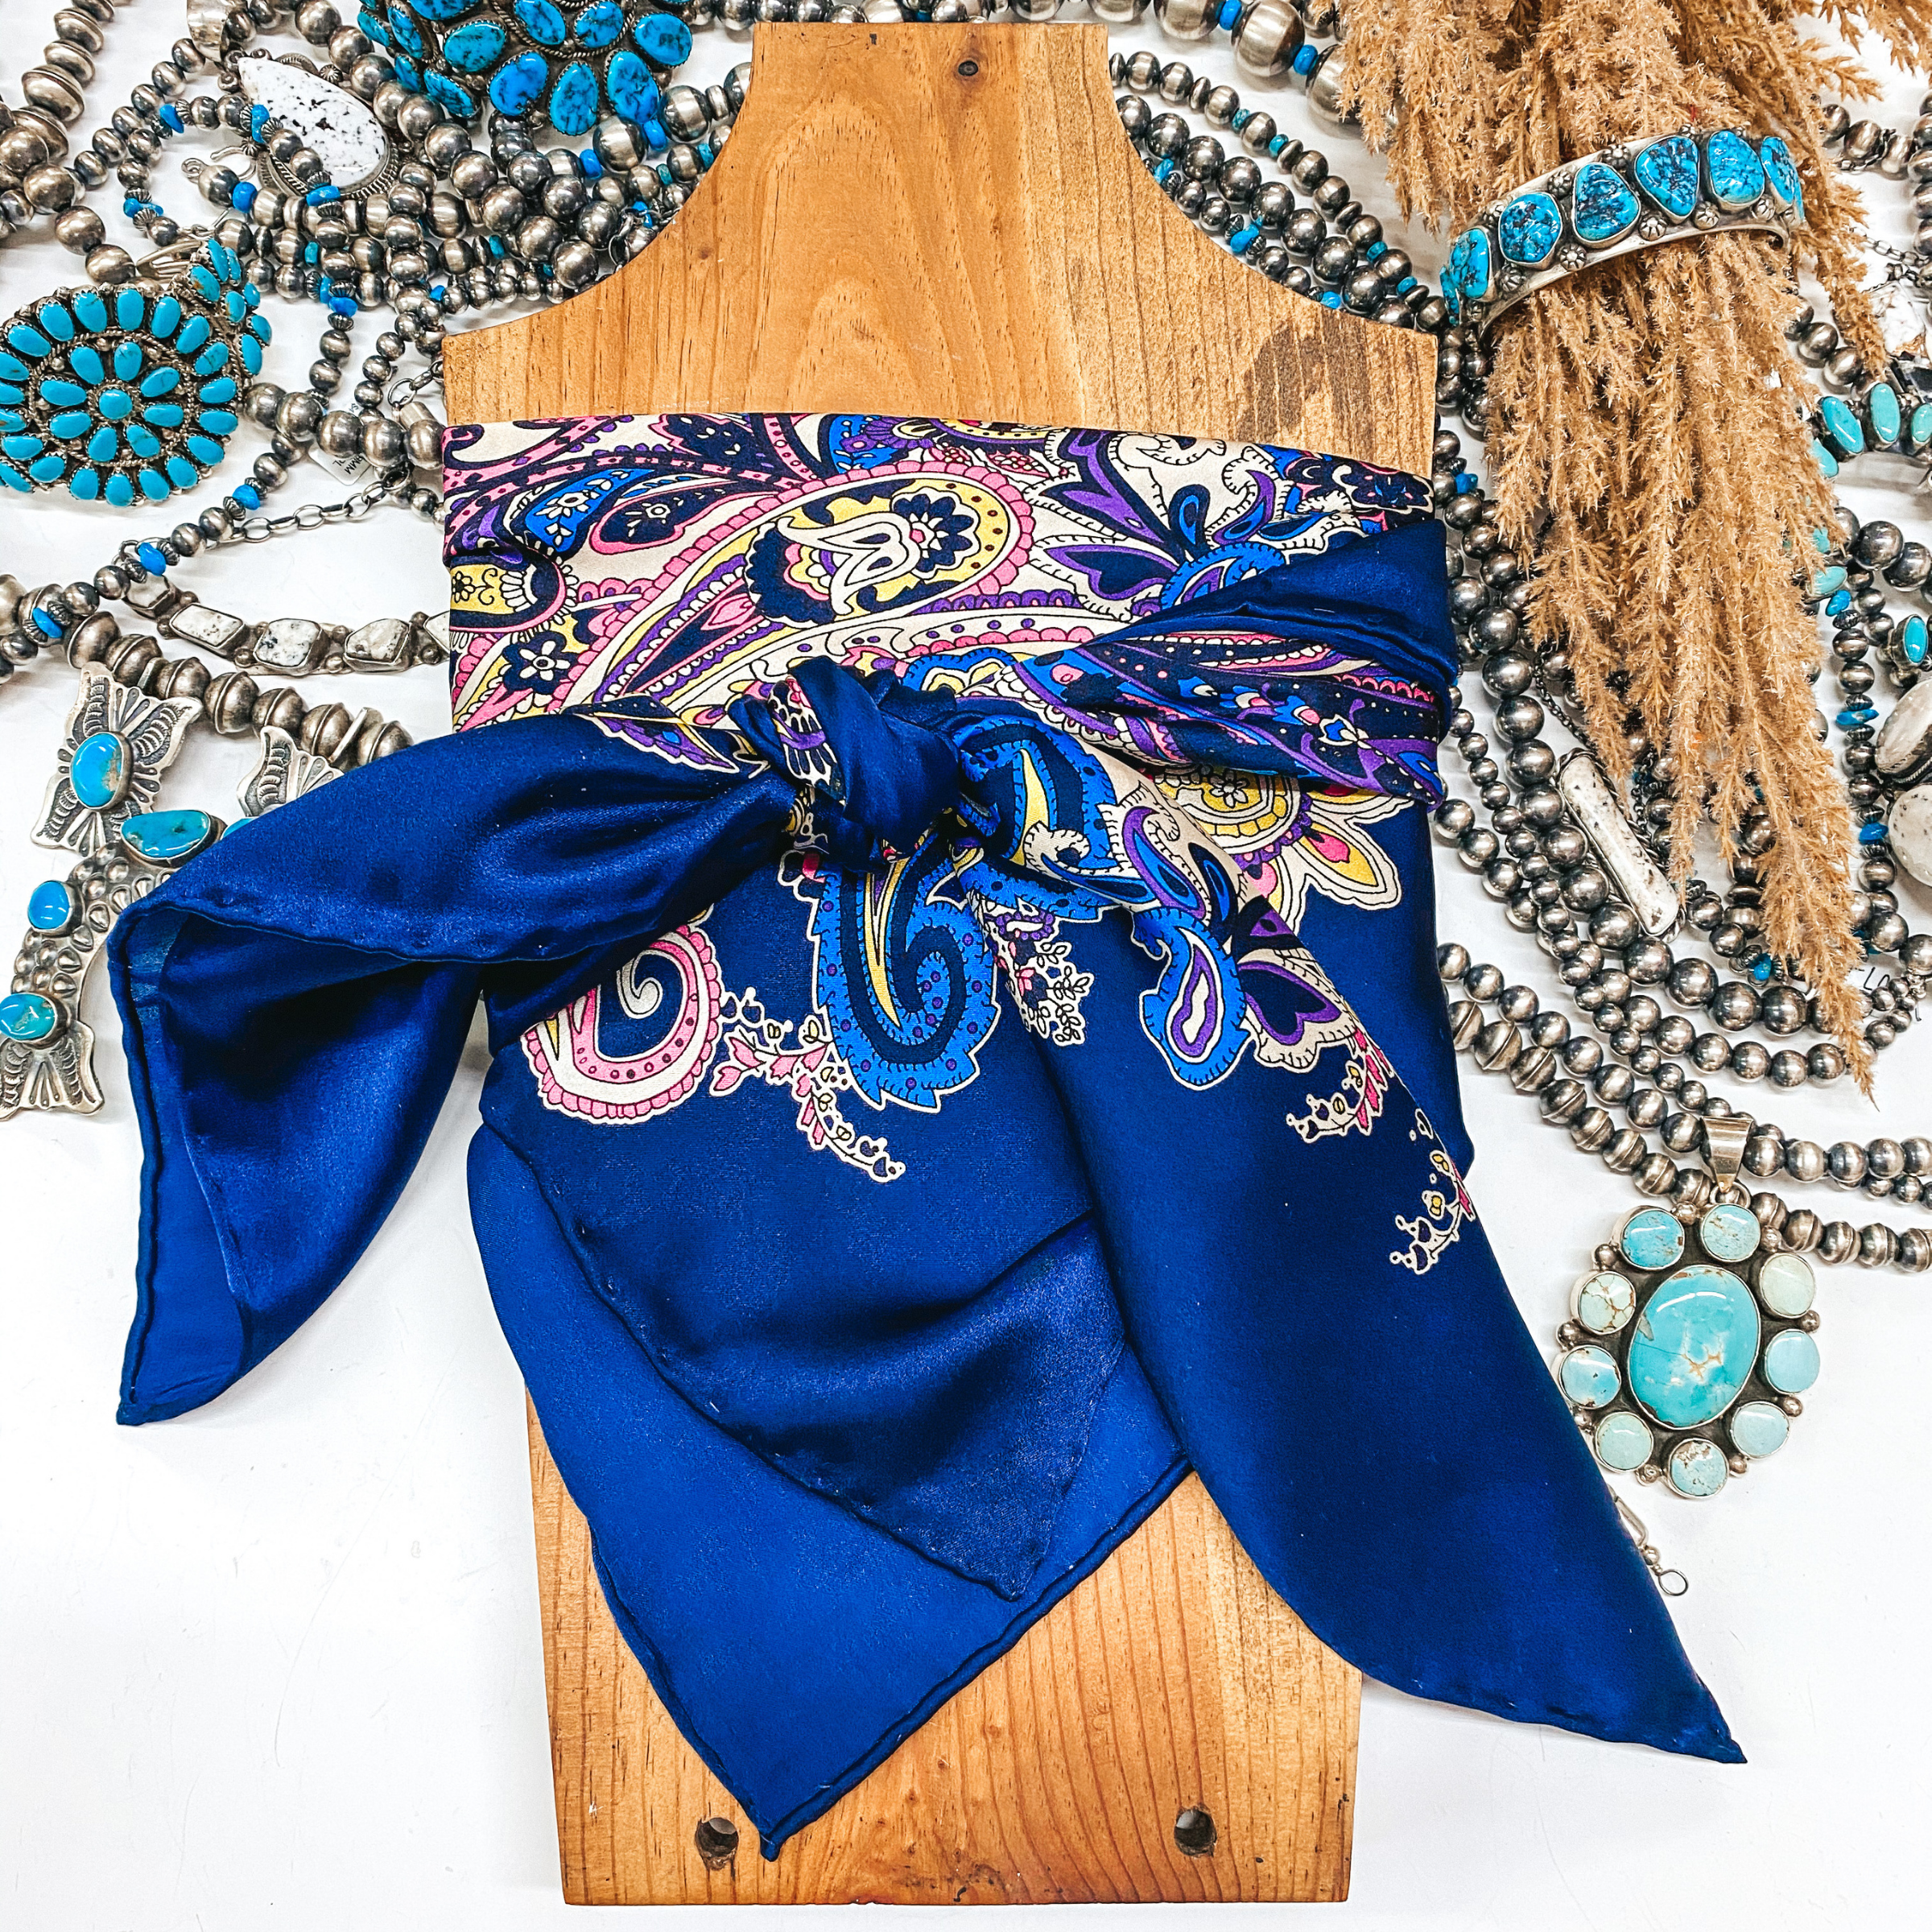 Frenzy Charmeuse Wild Rag Ivory and Navy - Giddy Up Glamour Boutique